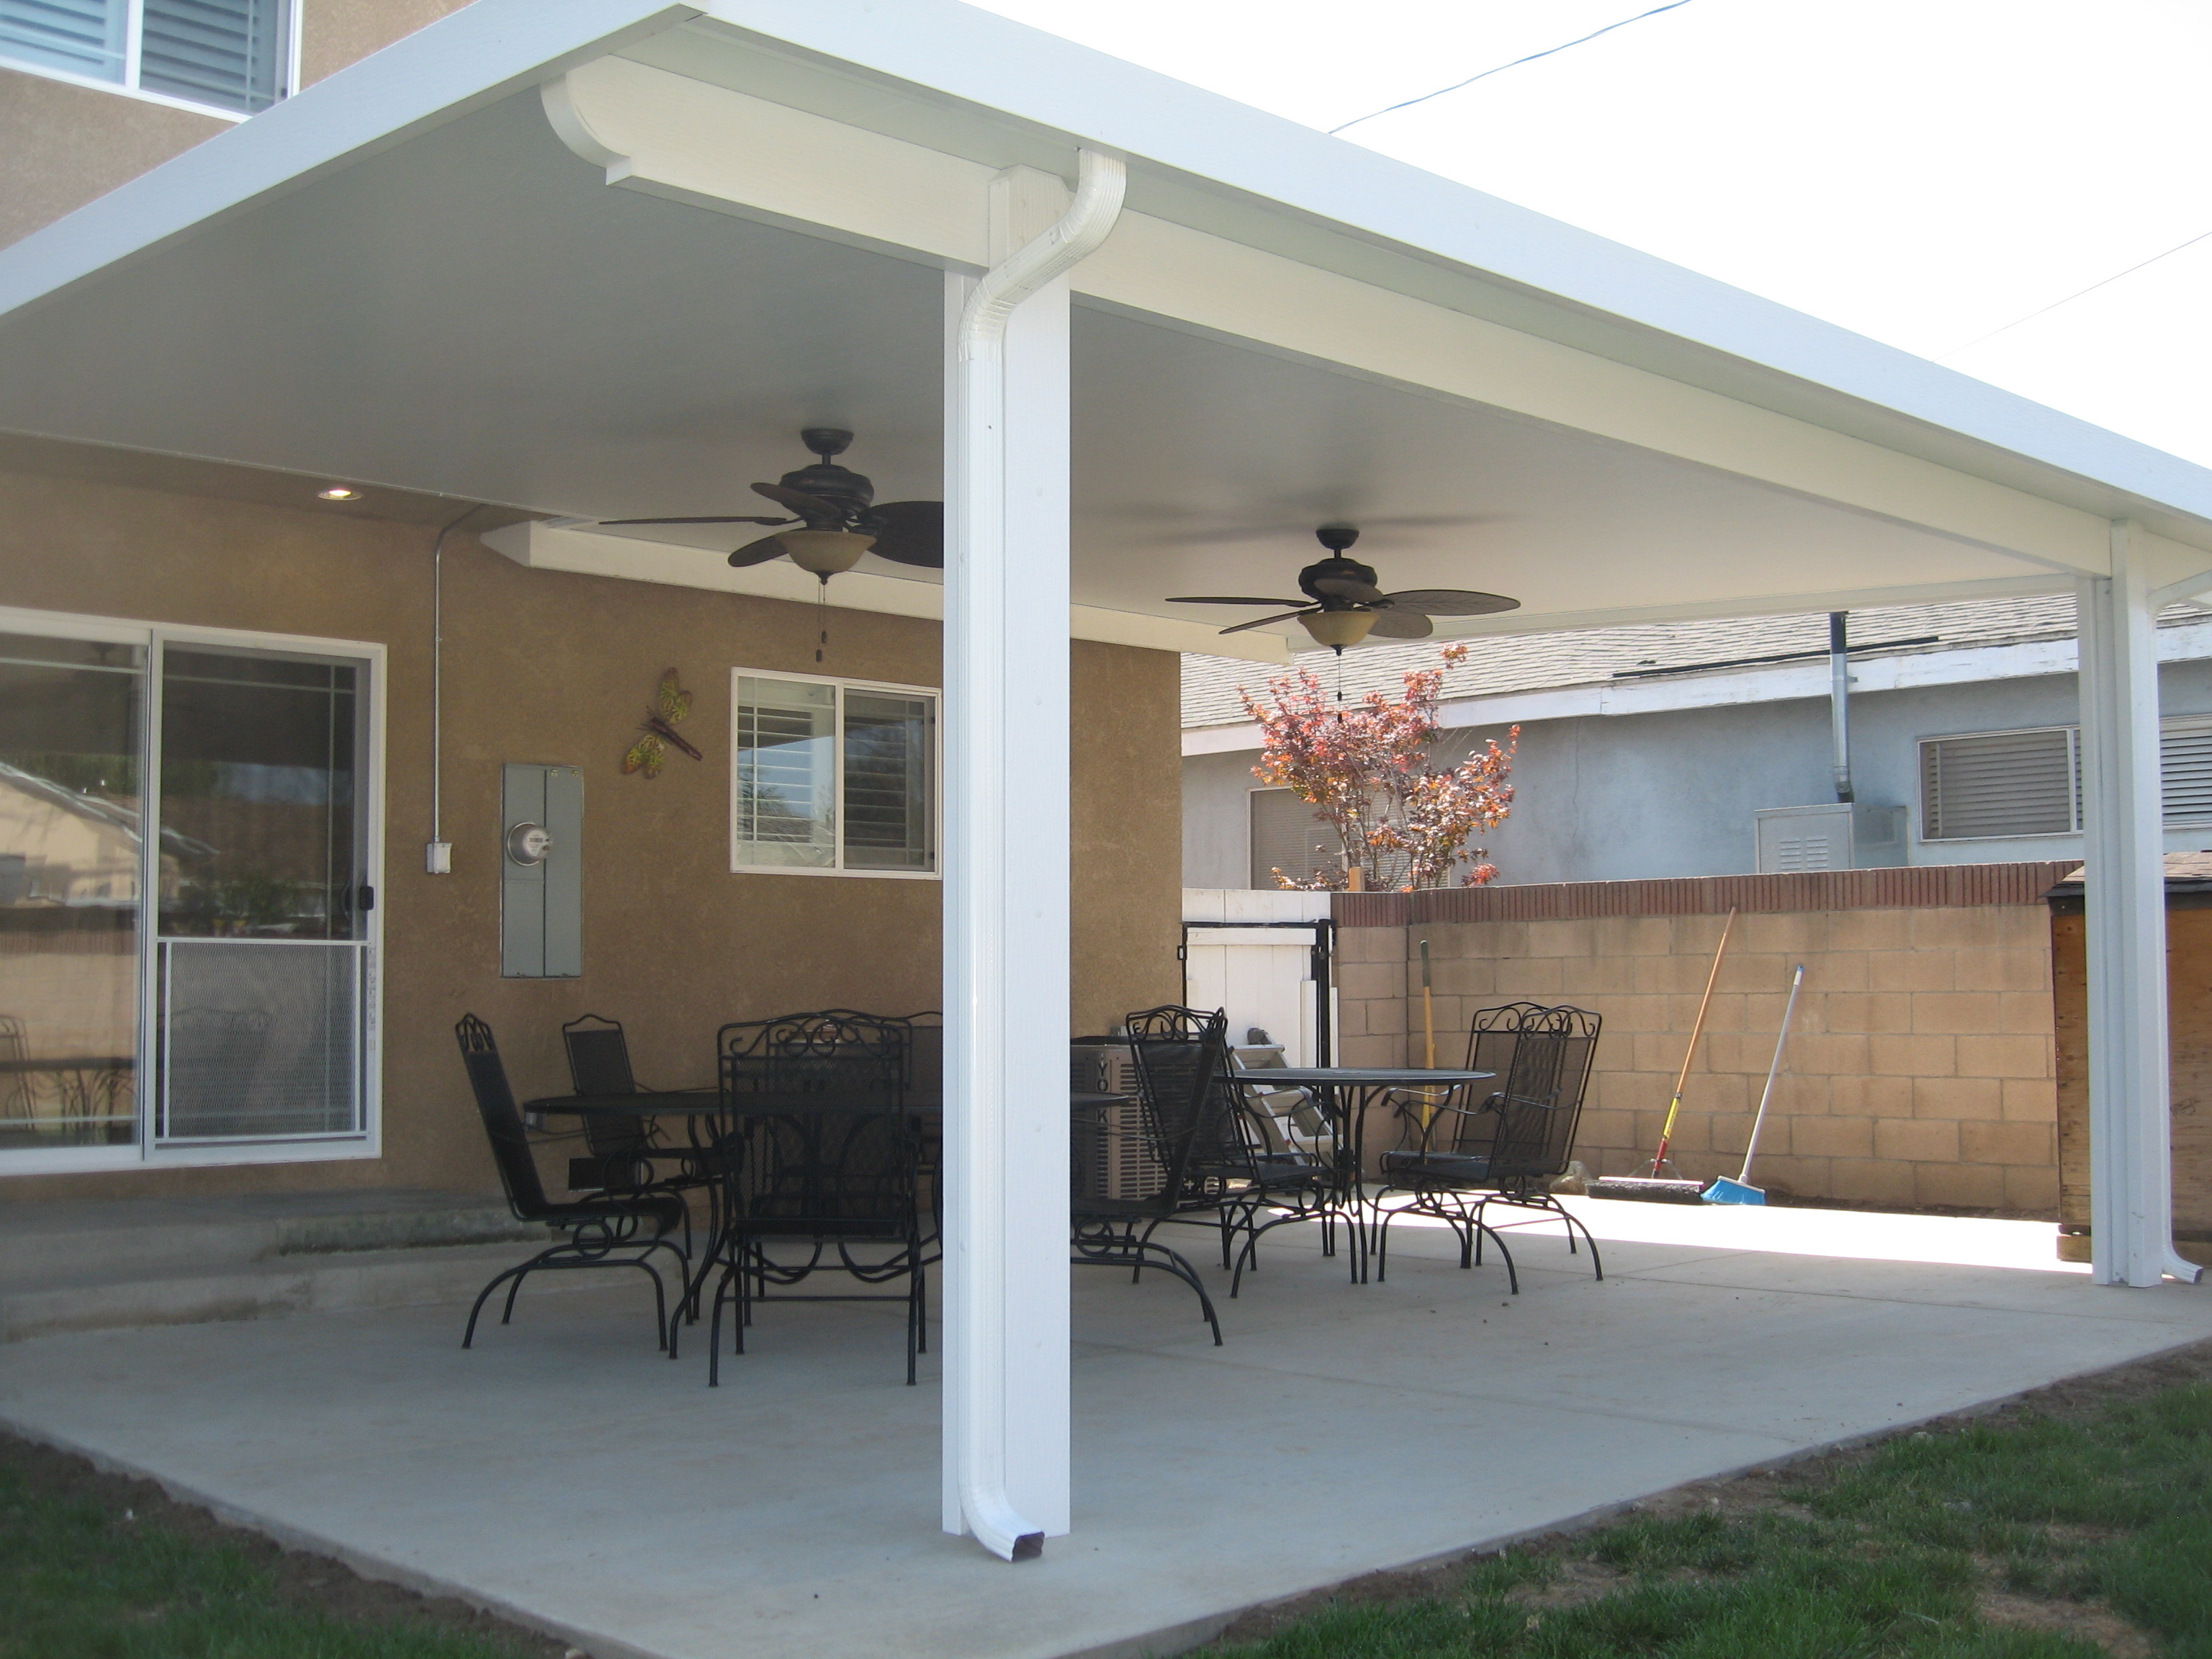 Polycarbonate Patio Covers In Los Angeles Orange County with dimensions 3072 X 2304